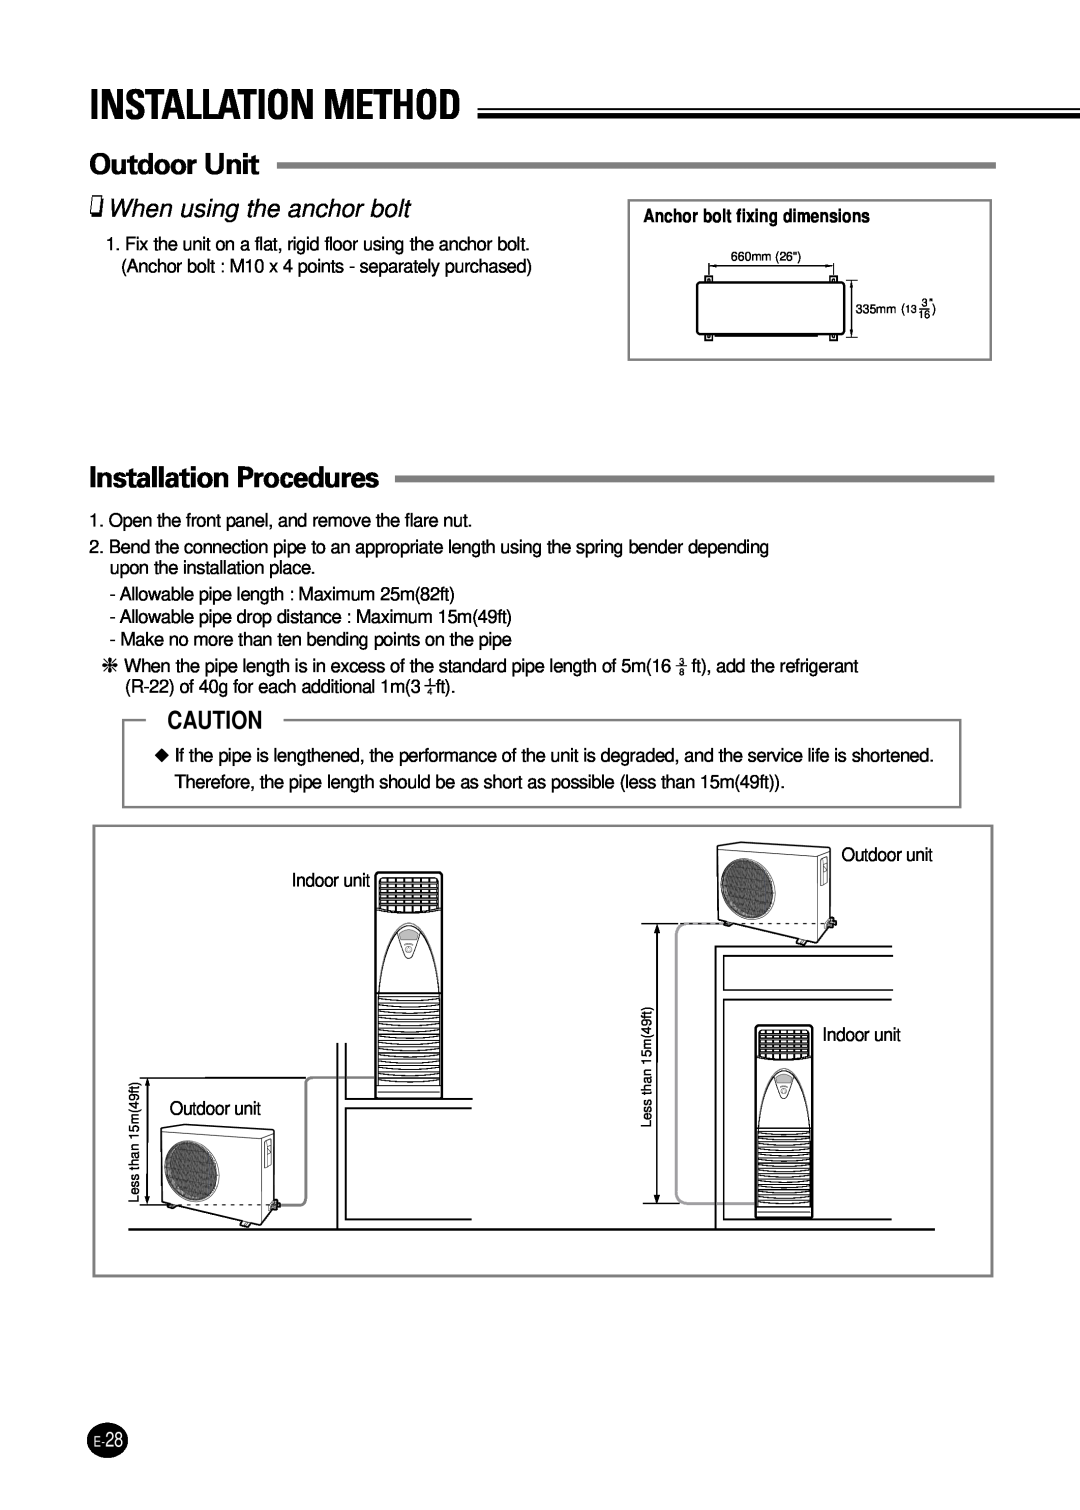 Samsung UPC3240C Installation Method, Installation Procedures, When using the anchor bolt, Anchor bolt fixing dimensions 